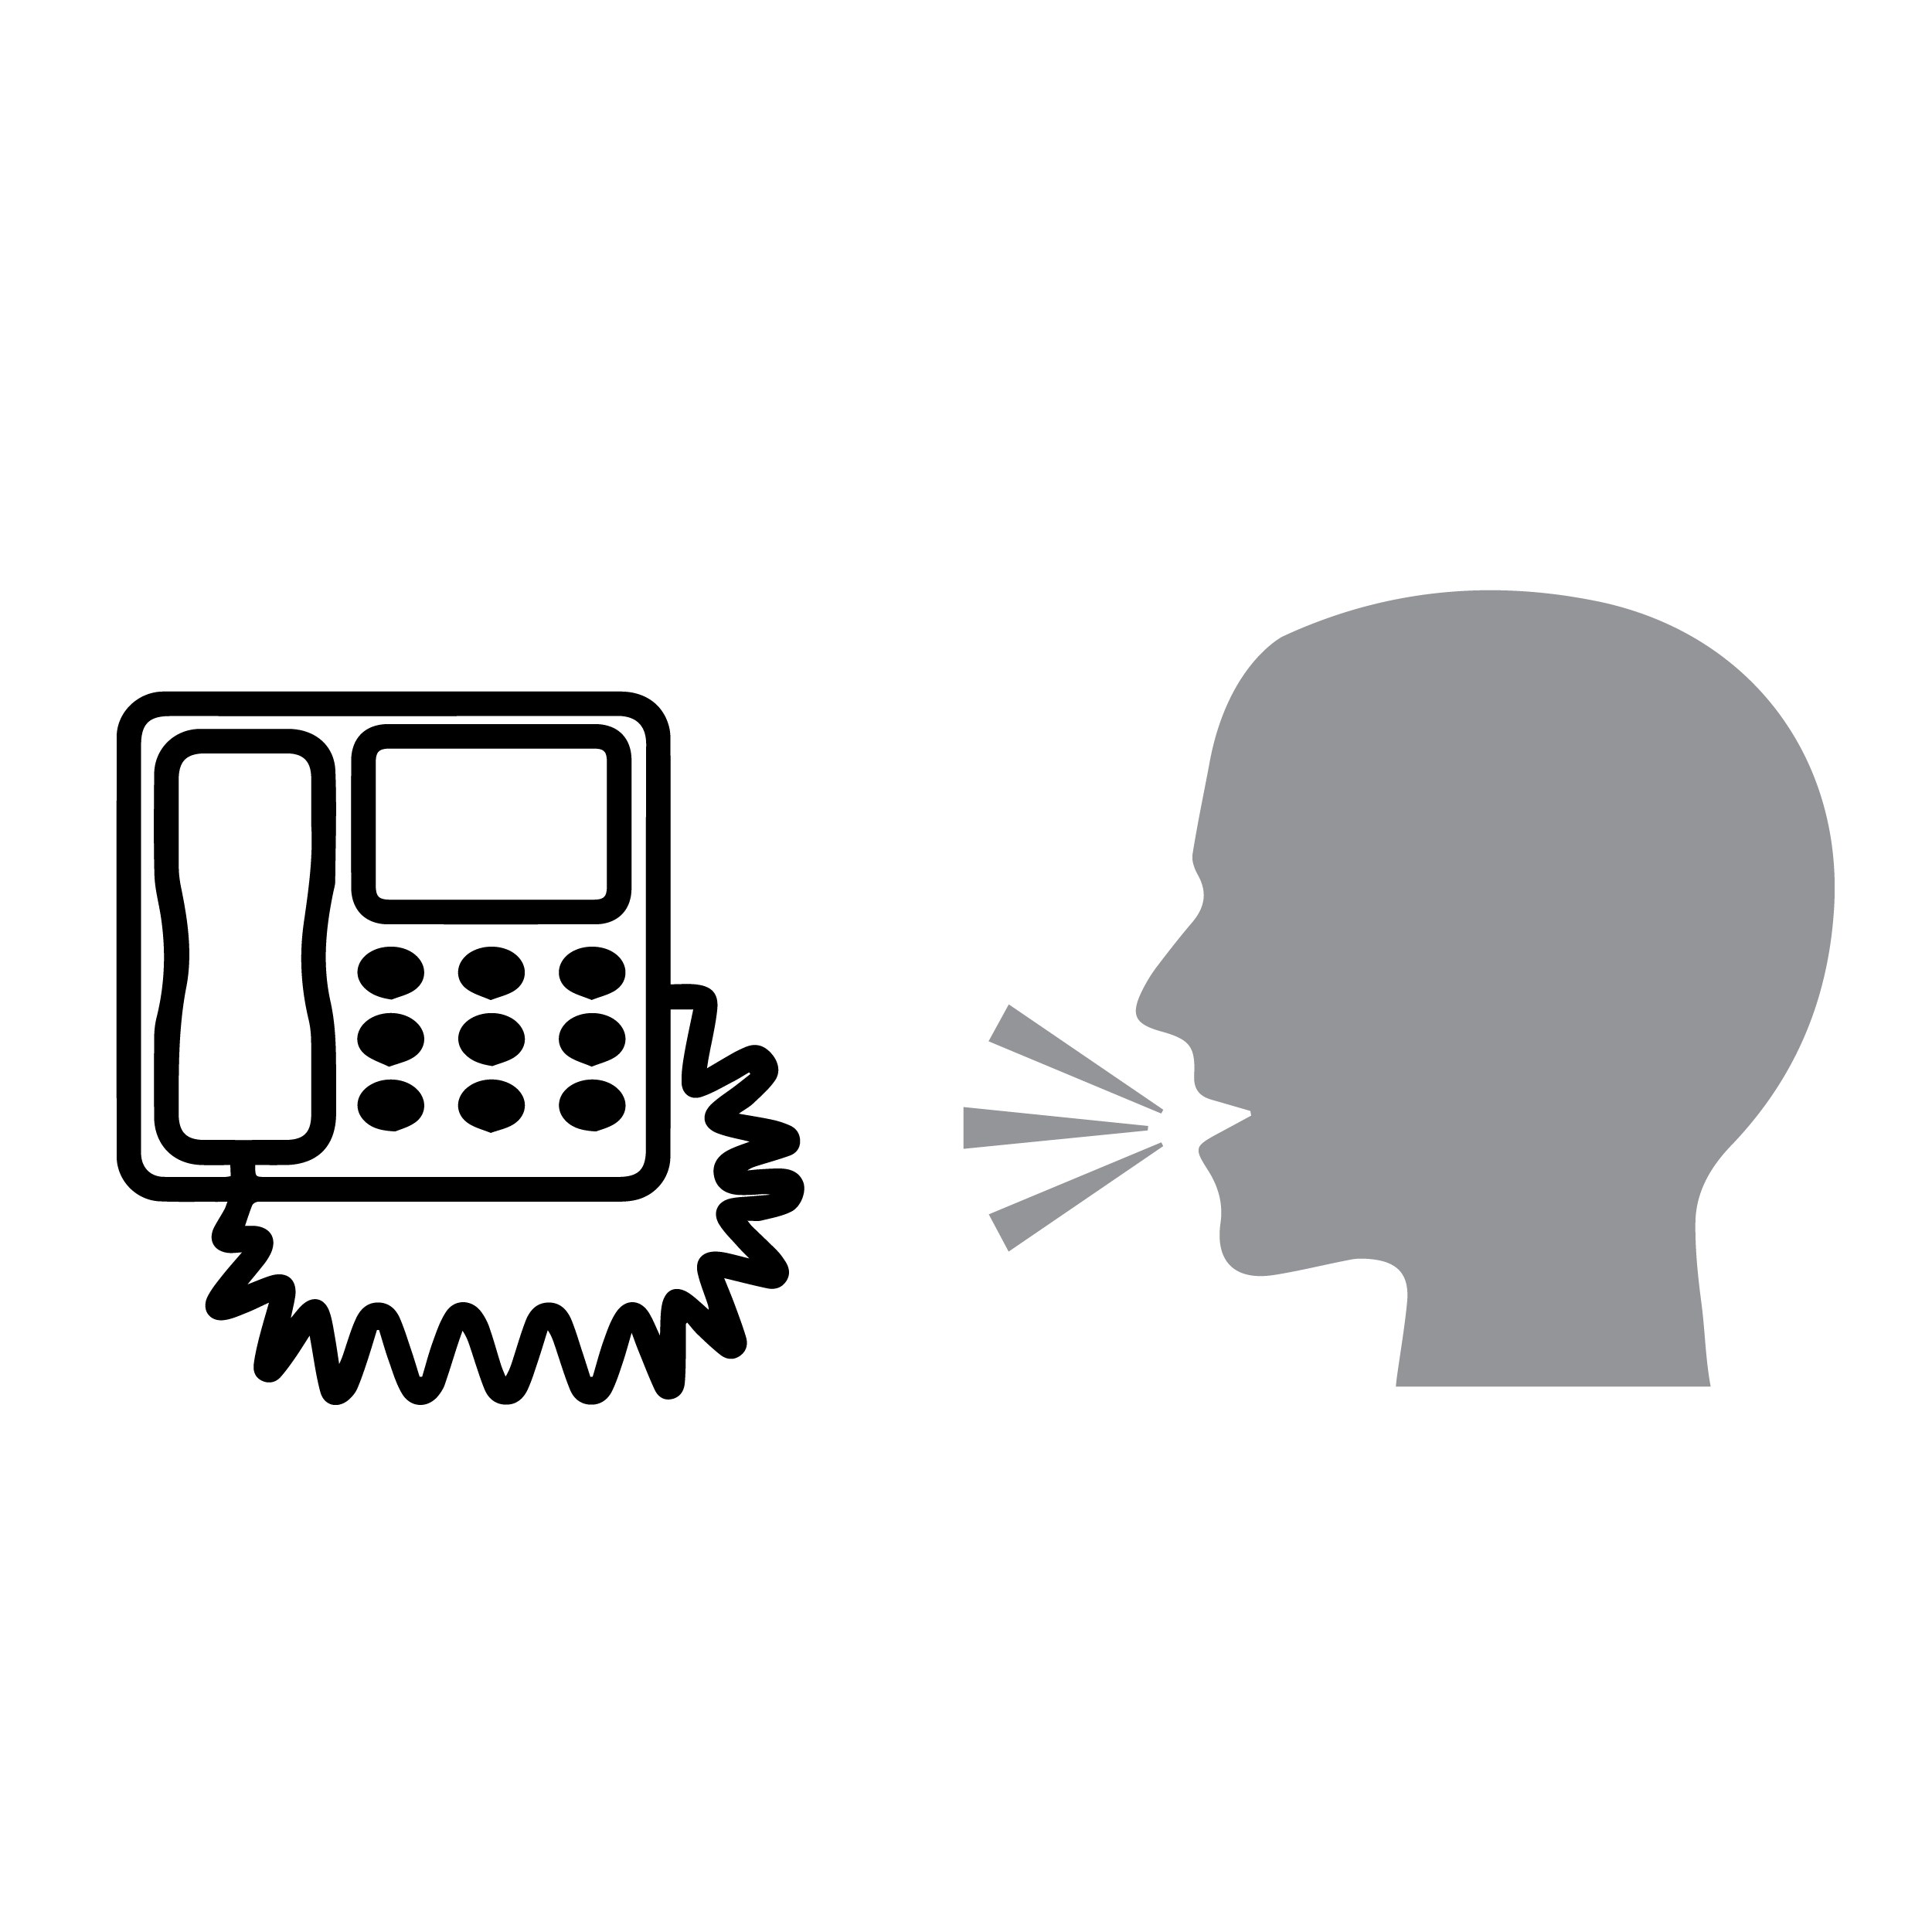 Landline phone with a dial pad. Illustration of a human face speaking in the direction of the phone.